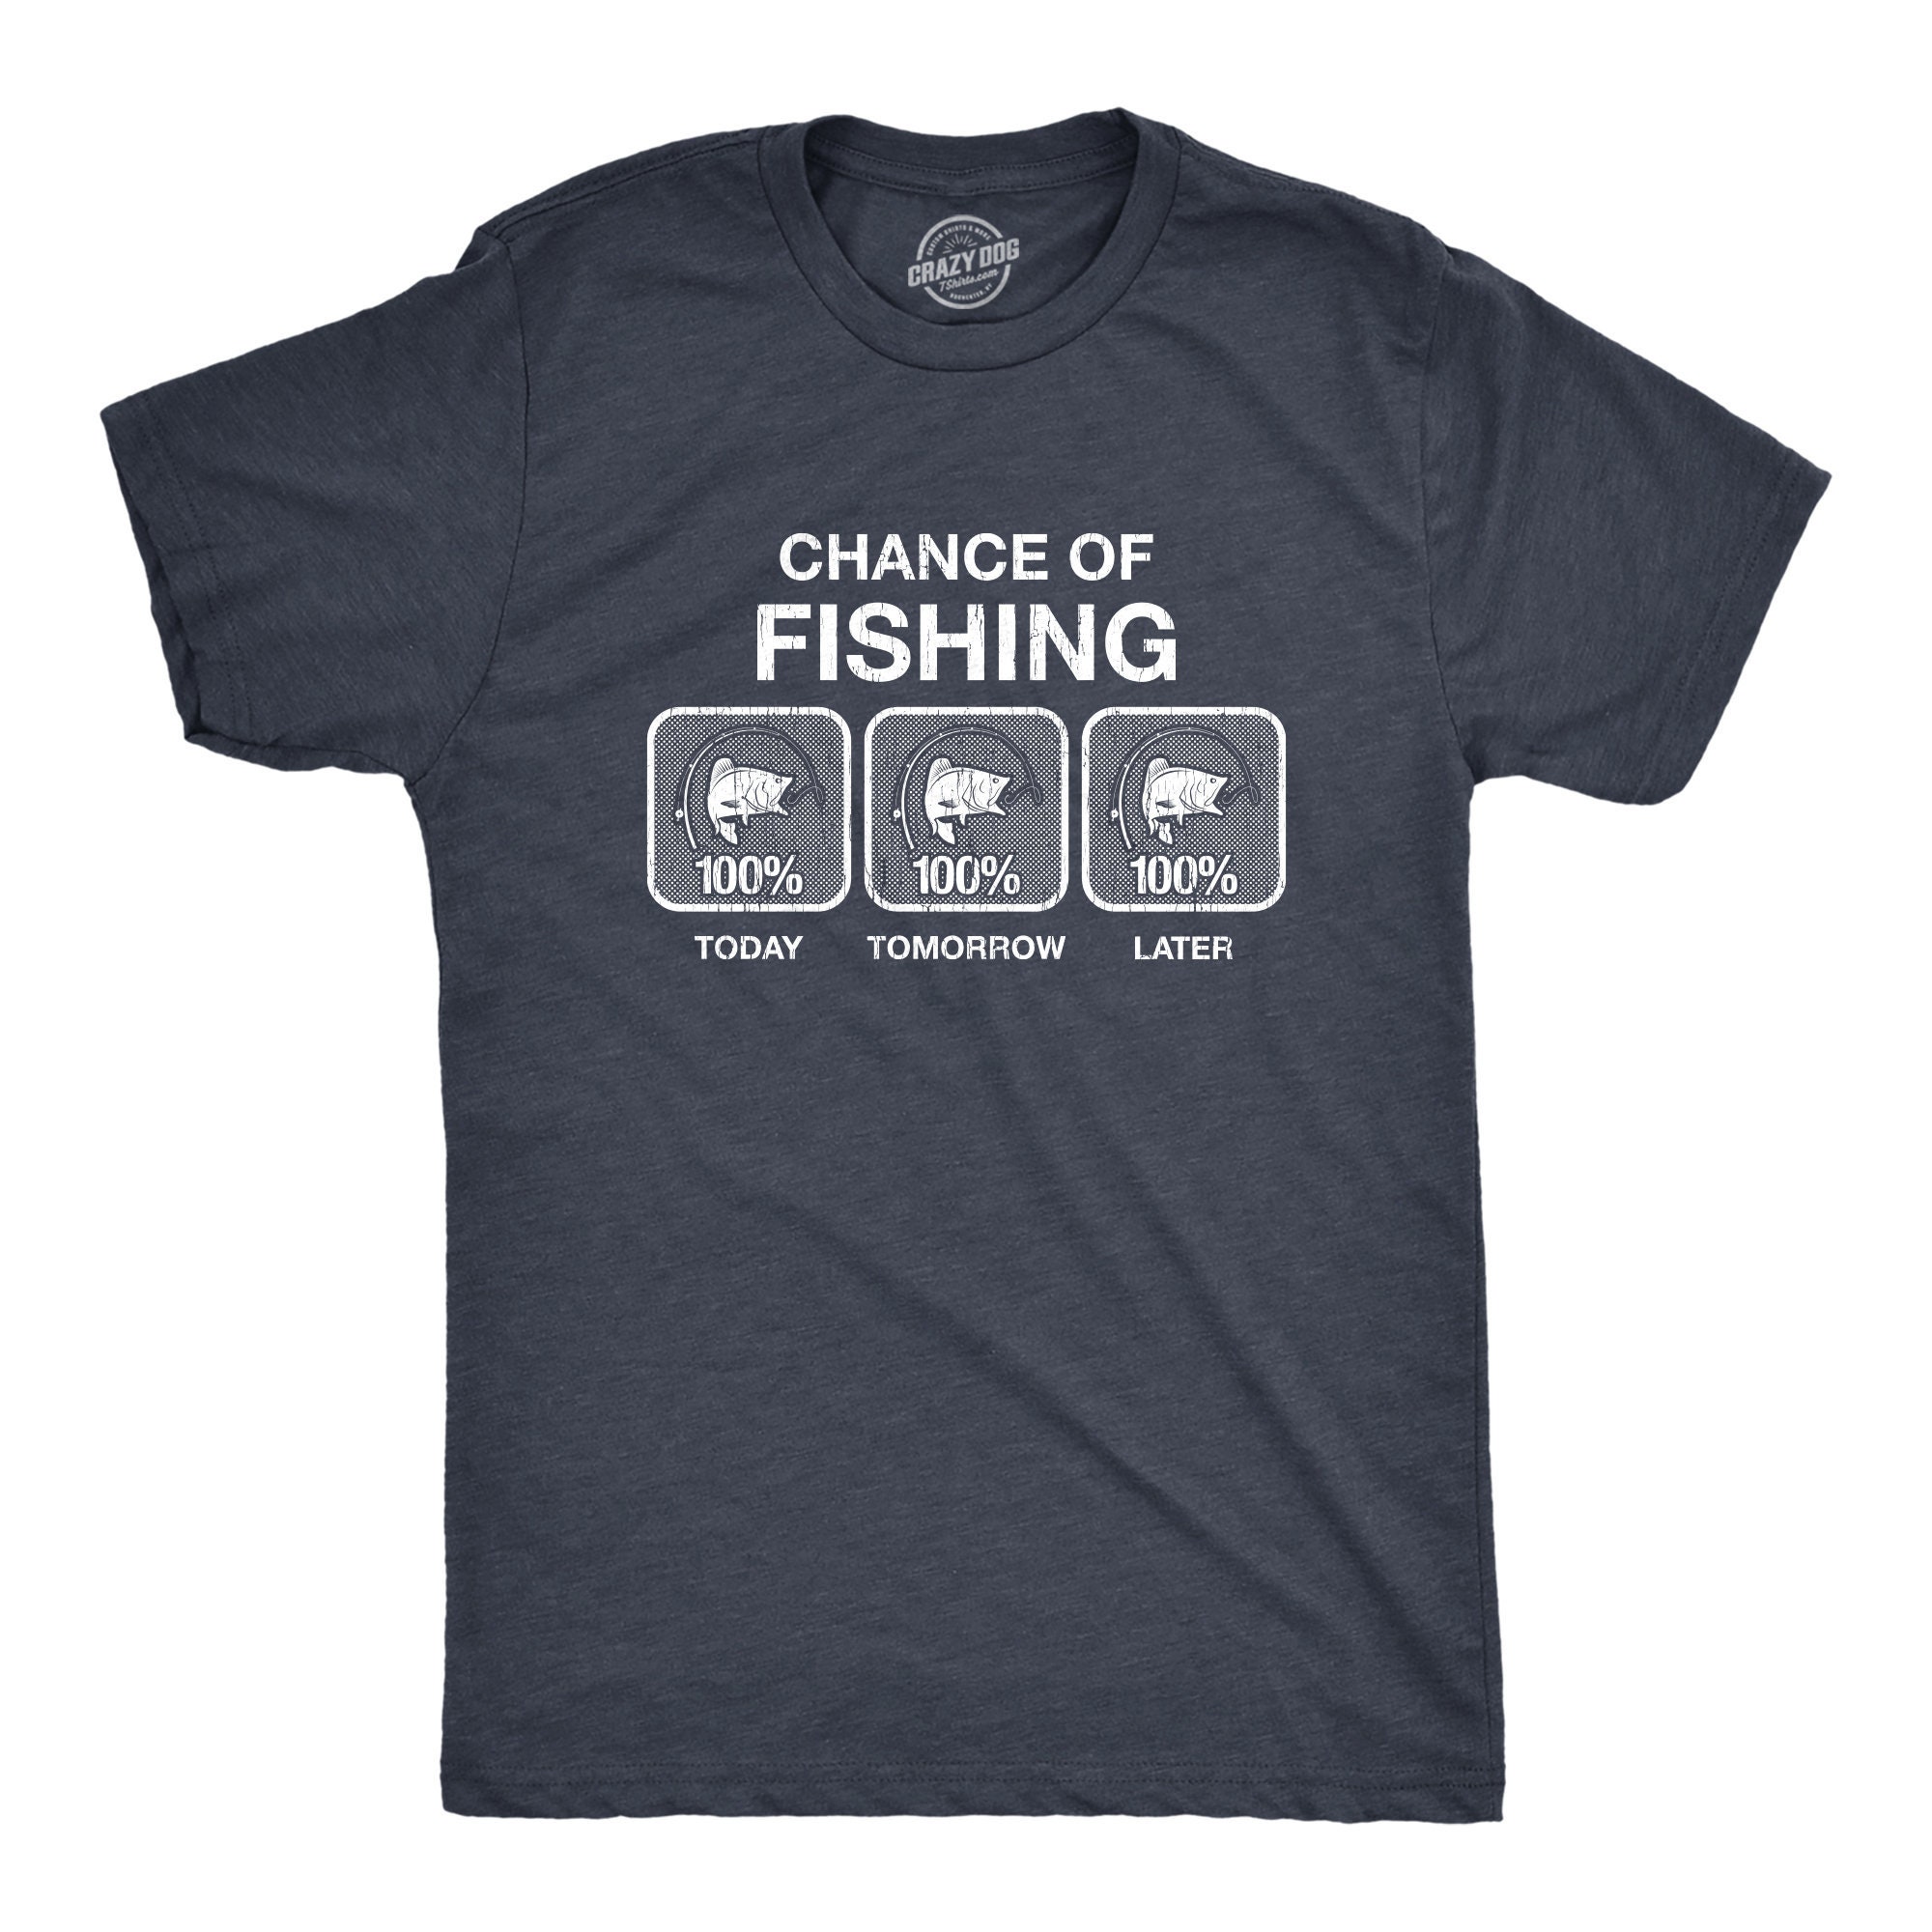 Crazy Dog T-Shirts Mens 100% Chance Of Fishing Tshirt Funny Outdoor Fishing Novelty Camp Tee (Heather Navy) - S Other S